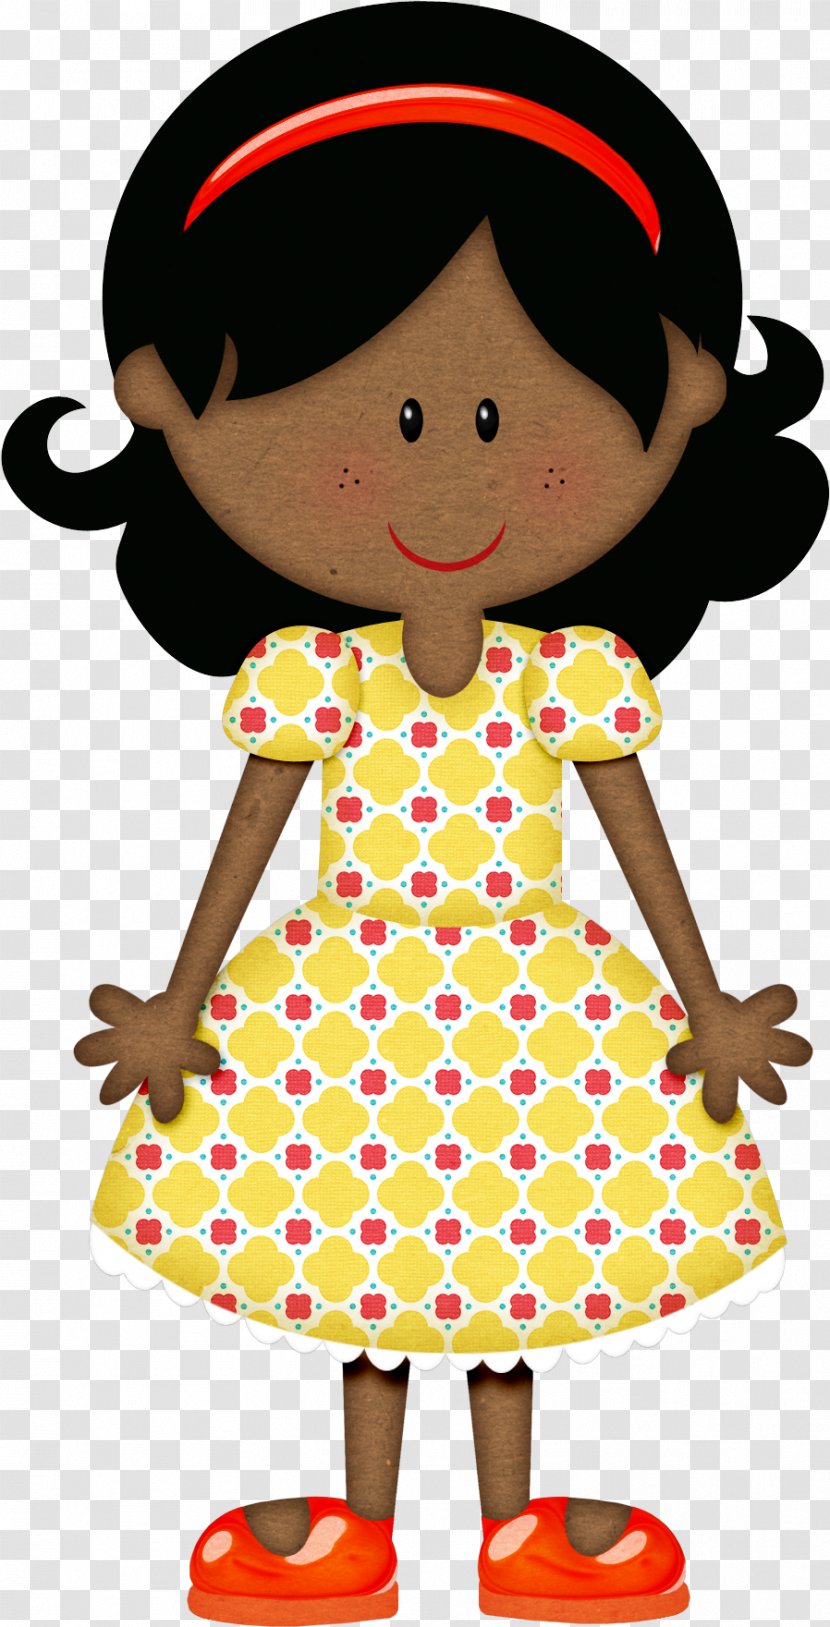 Party Girl - Painting - Polka Dot Toy Transparent PNG